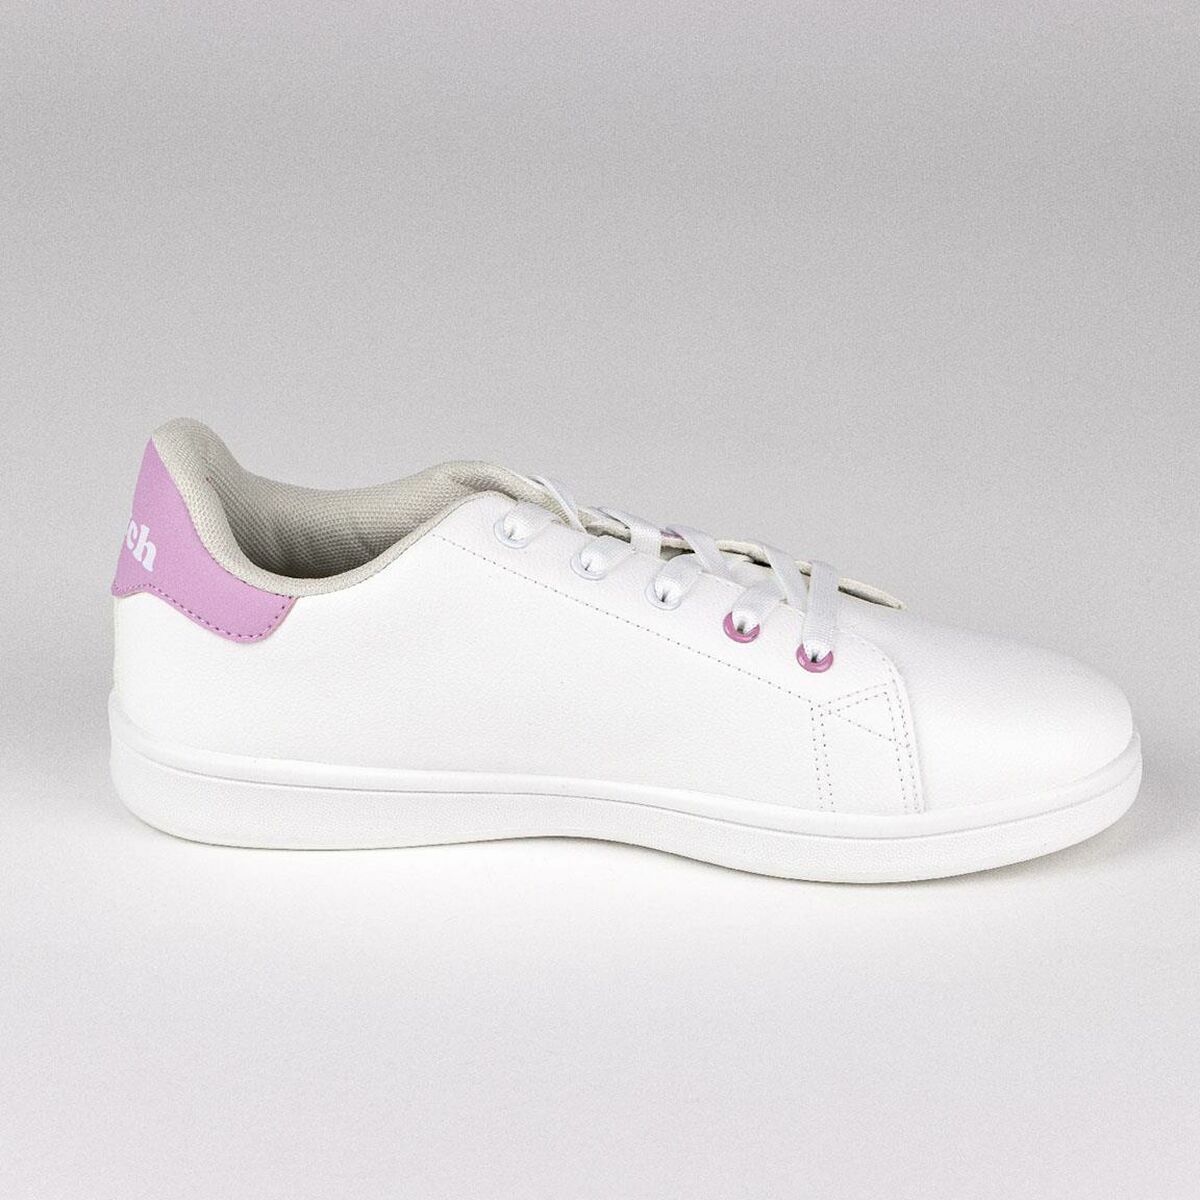 Sports Trainers for Women Stitch White